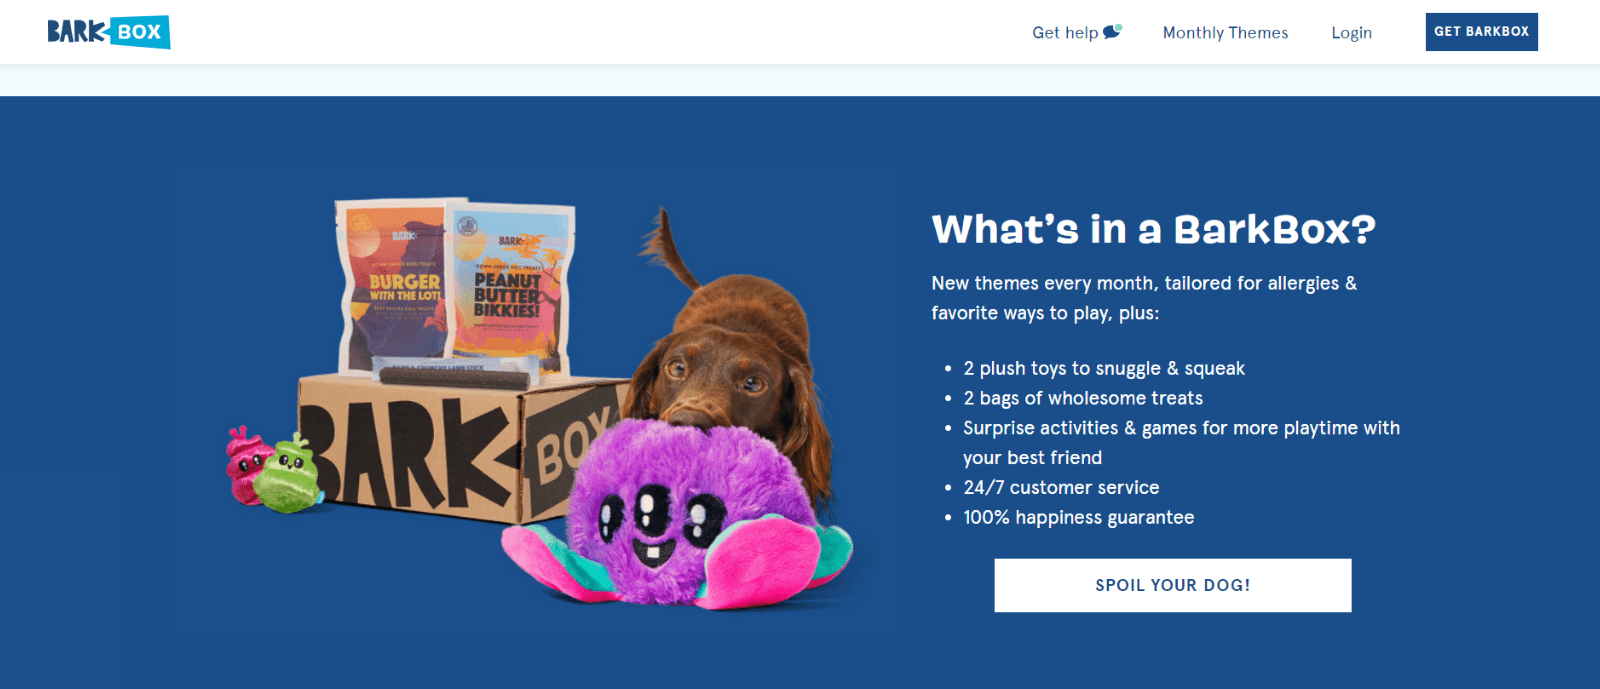 Monthly Box Subscriptions - BarkBox